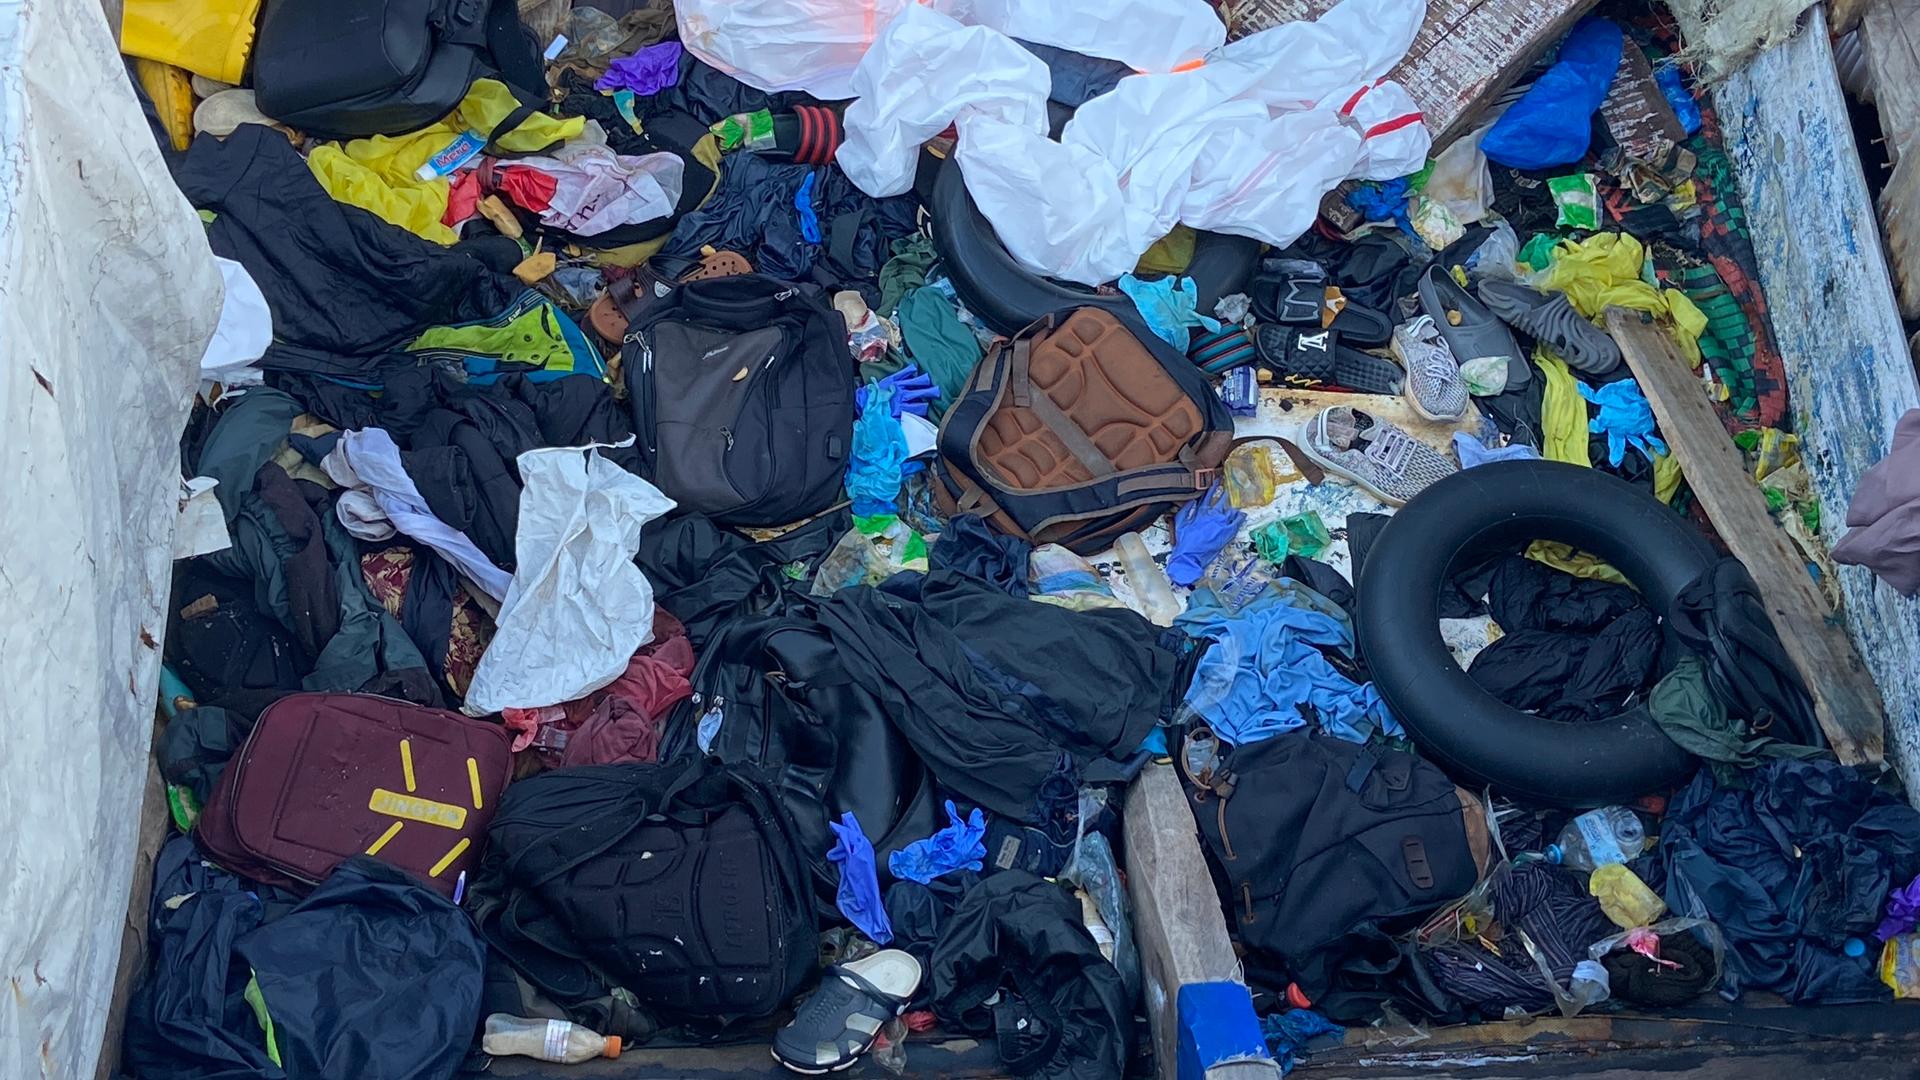 trash found in a boat from migrants